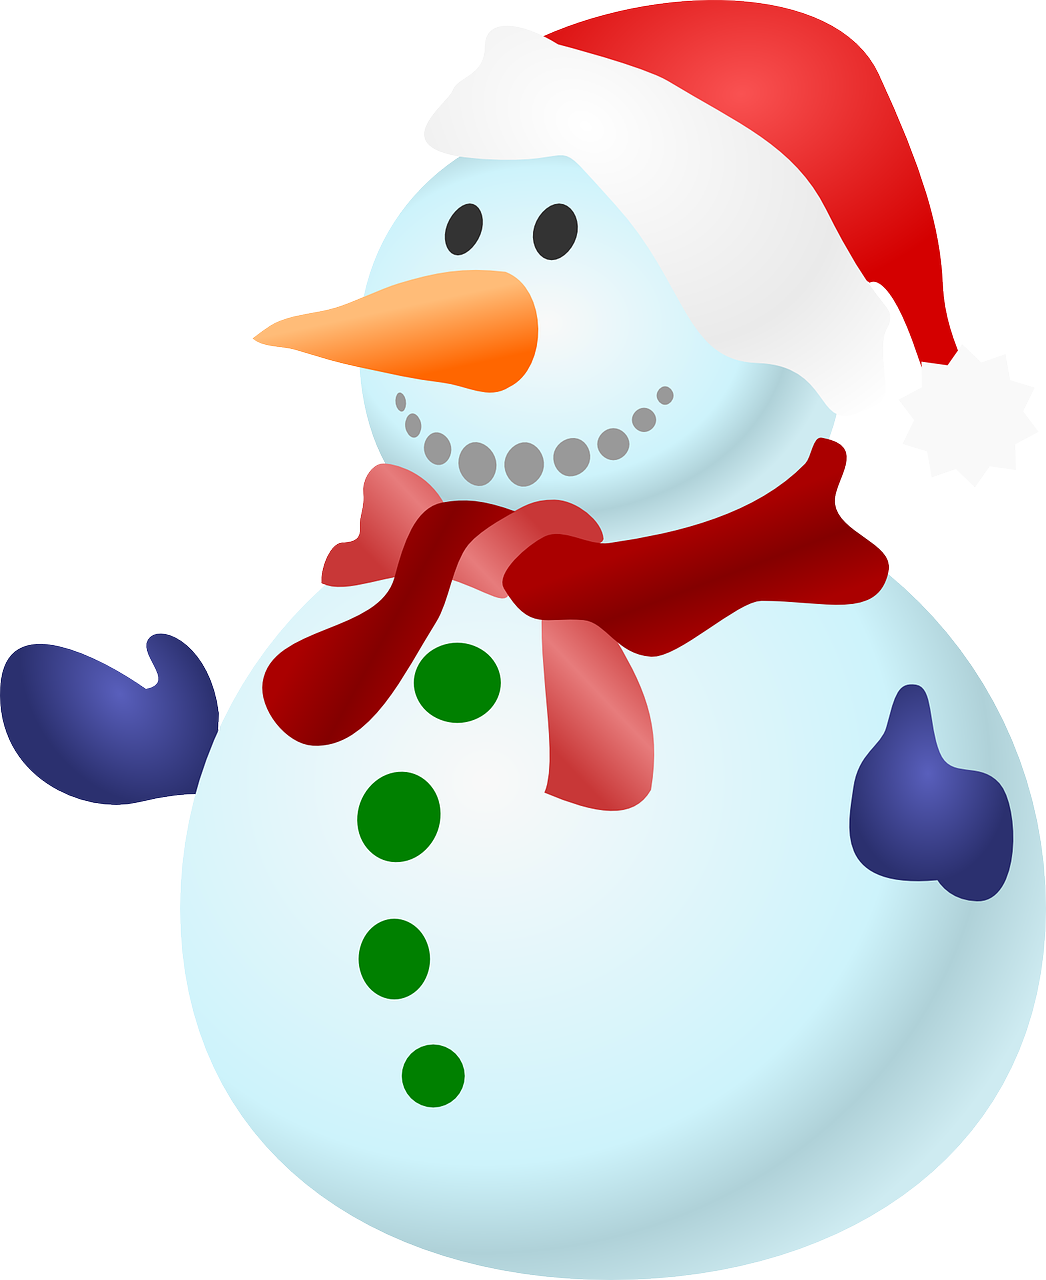 Snowman clipart cold, Snowman cold Transparent FREE for download on ...